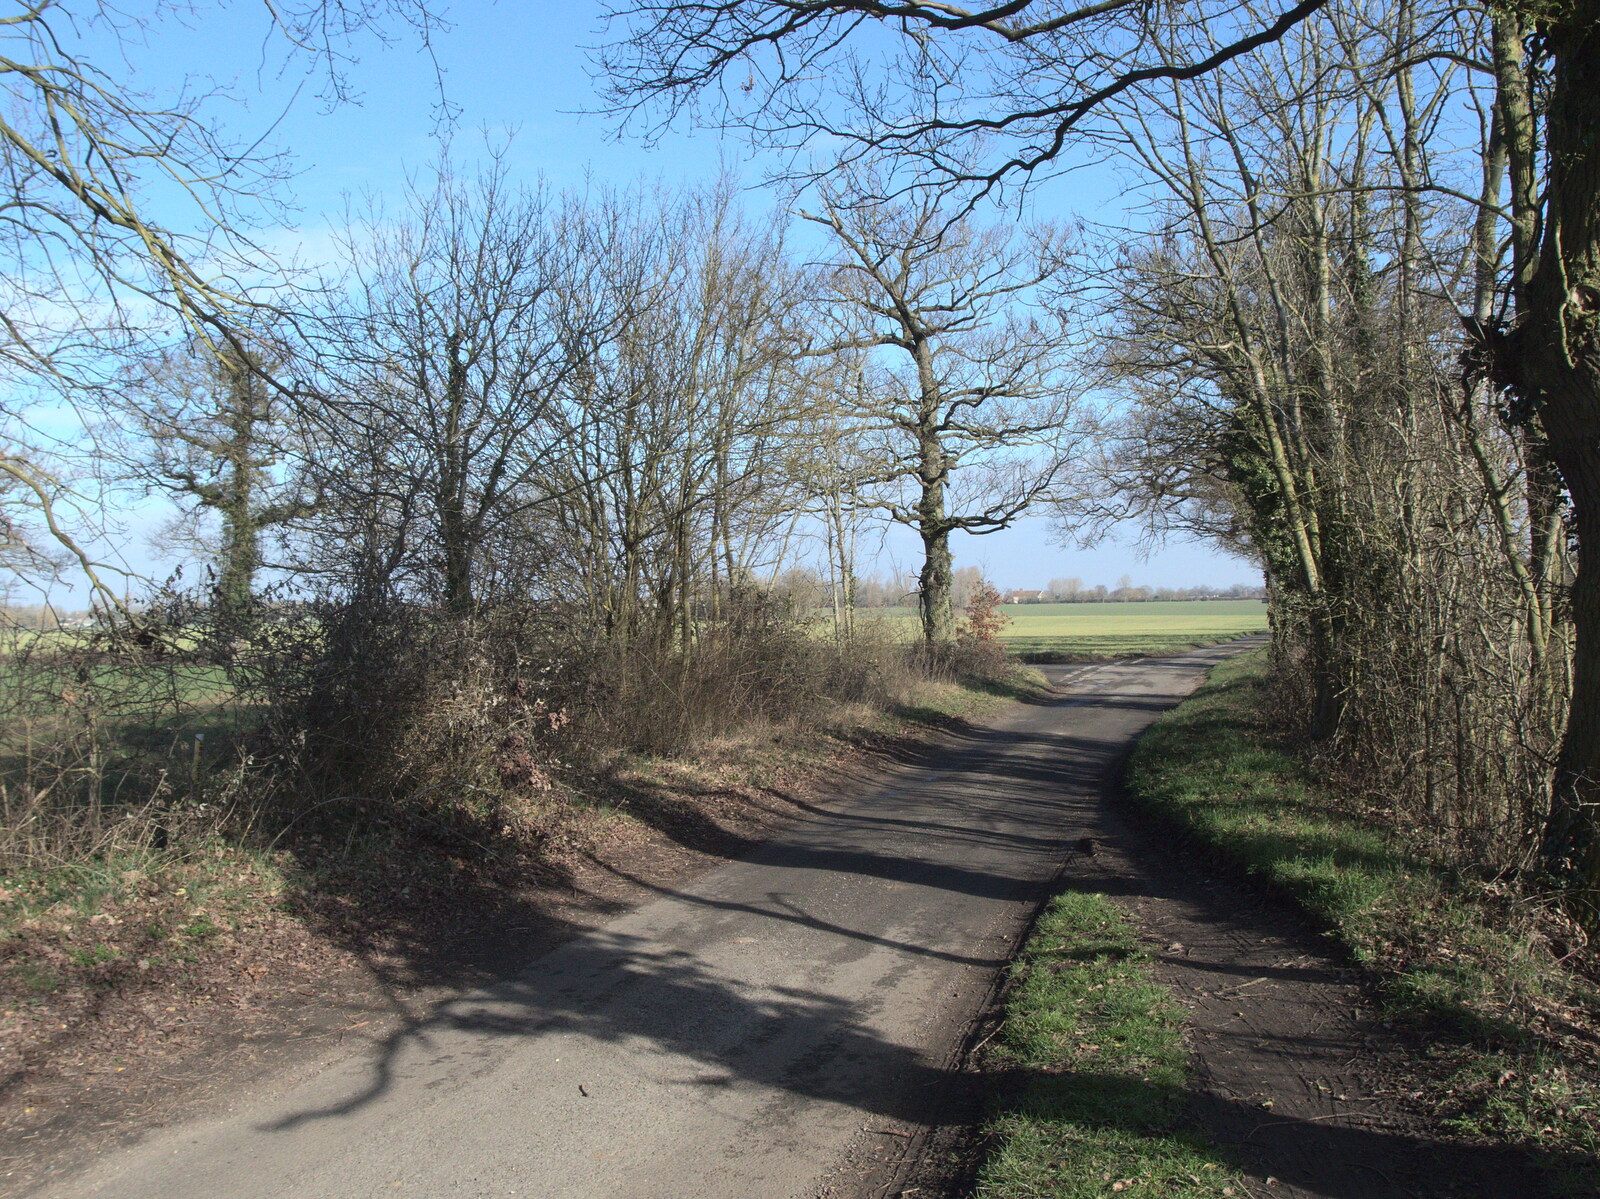 Looking back to Earlsford Road from A Vaccine Postcard from Harleston, Norfolk - 22nd March 2021